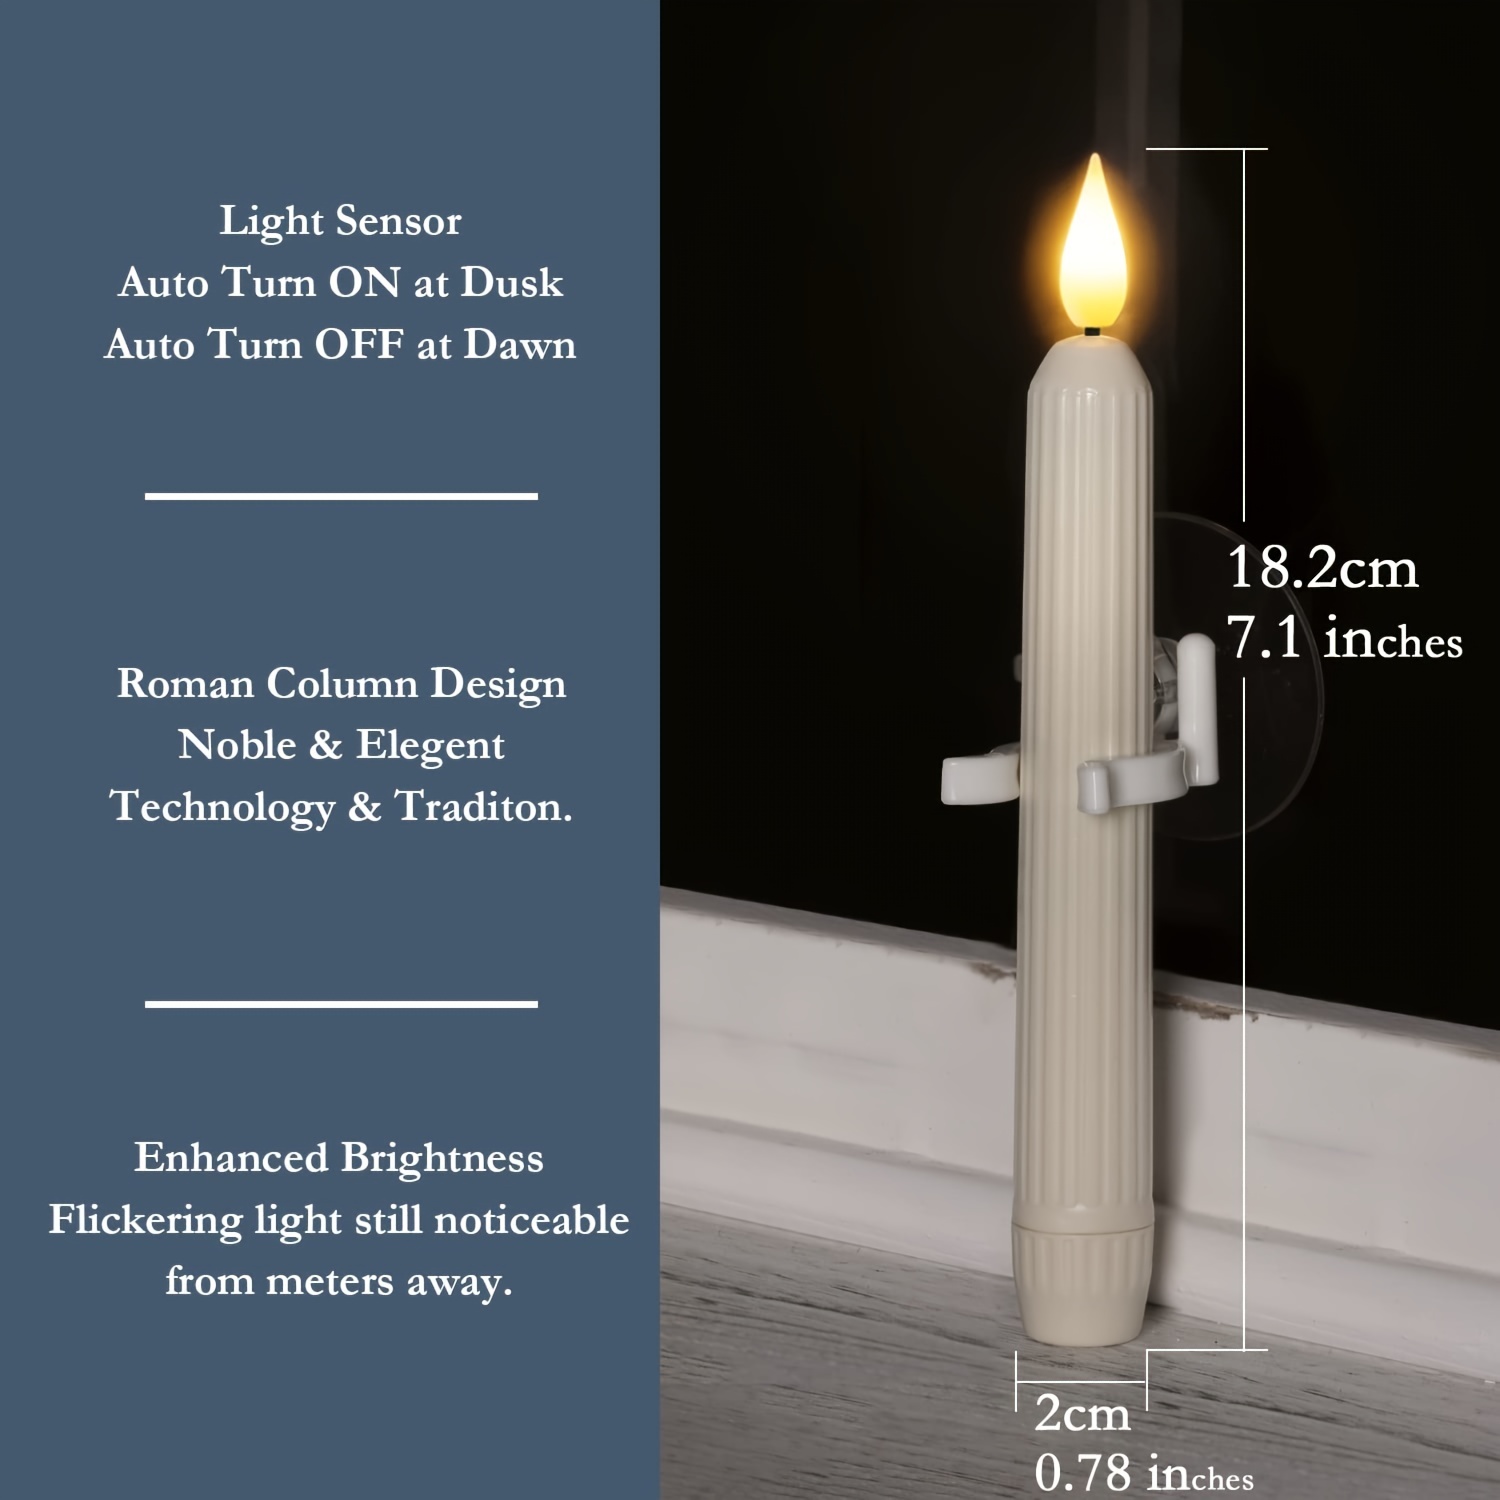 Soap & Candle Thermometer M03158 at Dadant